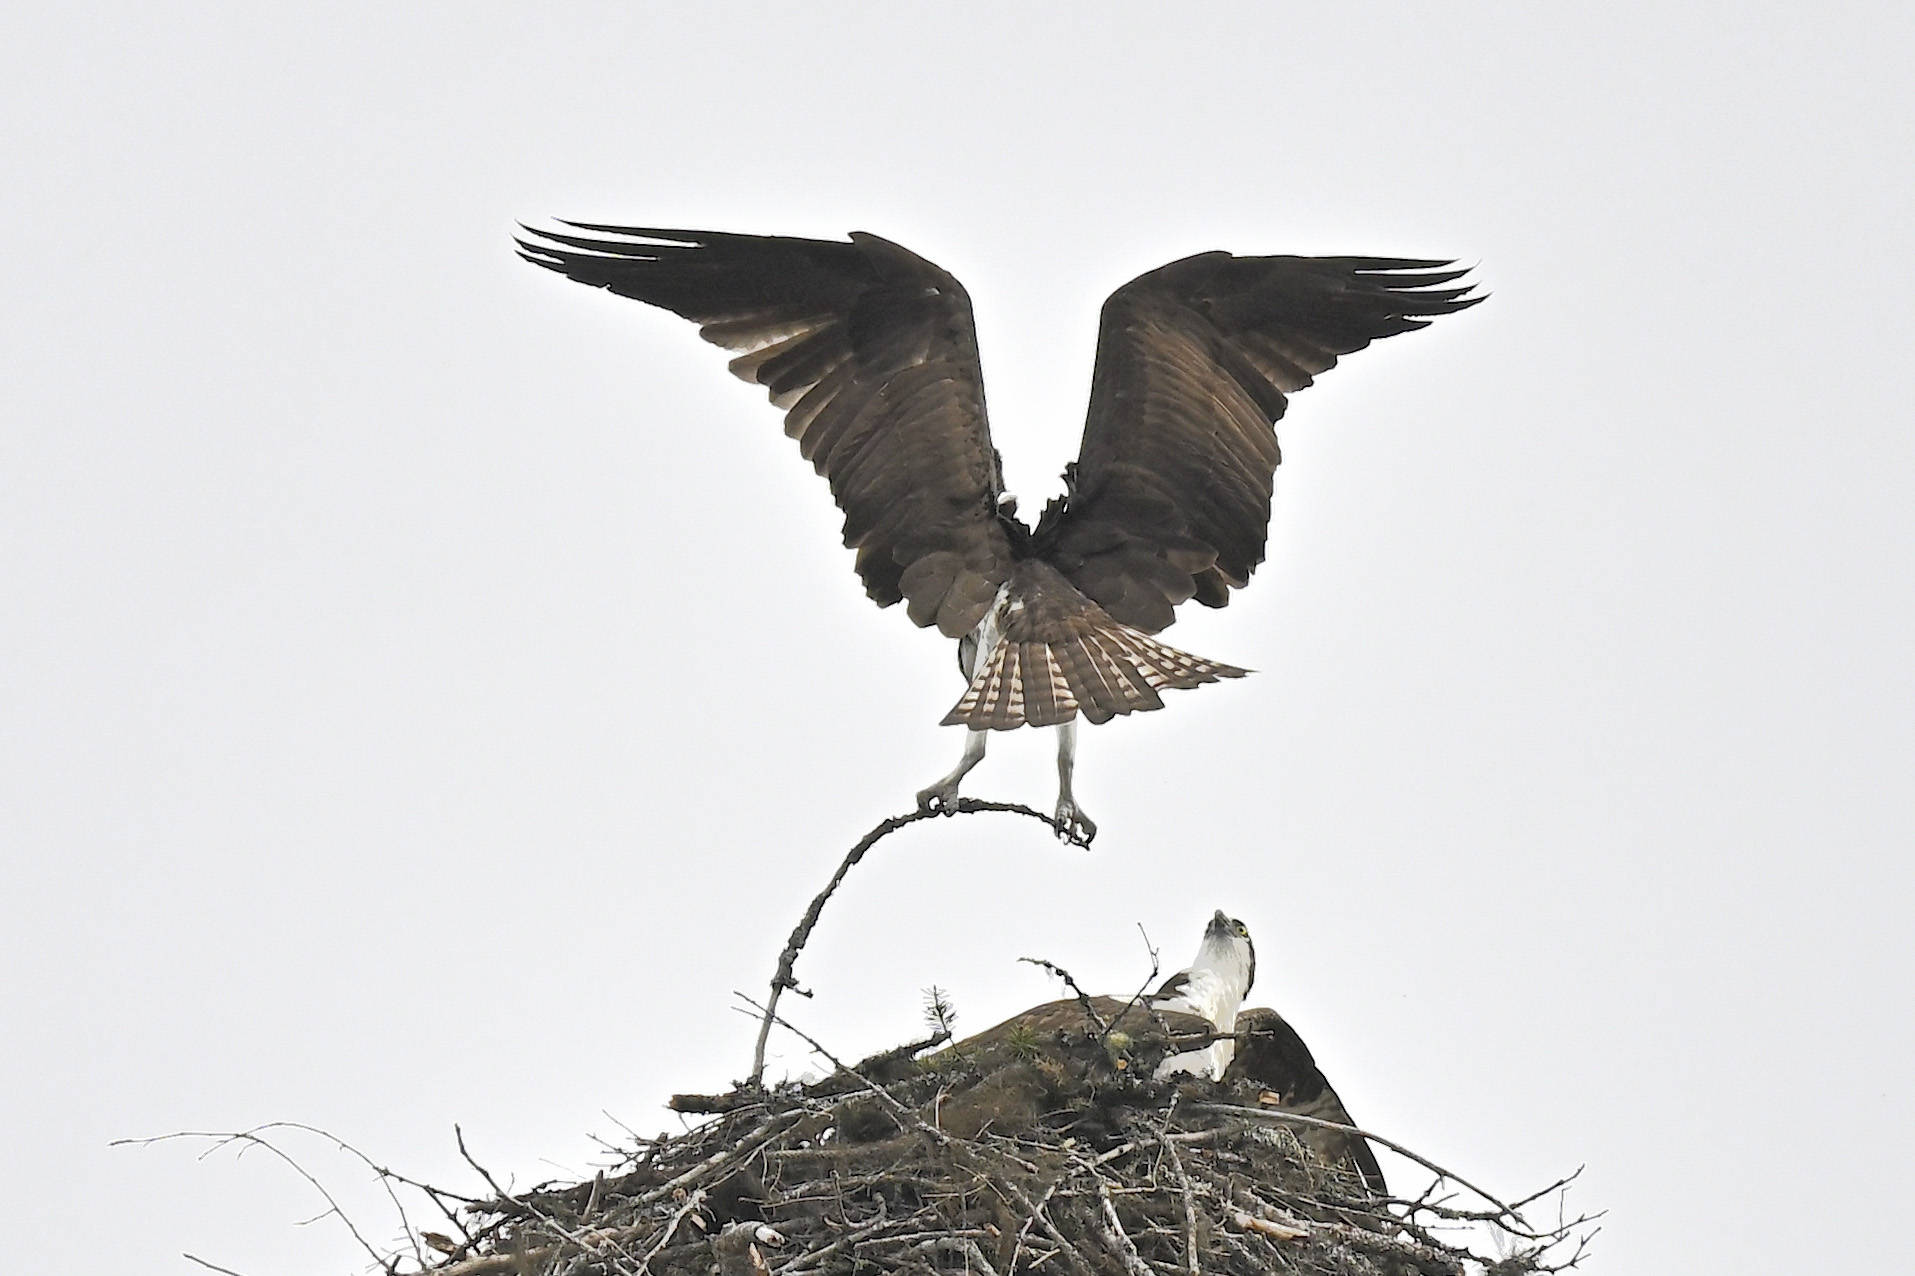 The ospreys in this photo are working on a nest beside Skimikin Lake on April 23, 2021. While just two ospreys can be seen, there is a third adult crouched deep inside the nest. (John Woods photo)